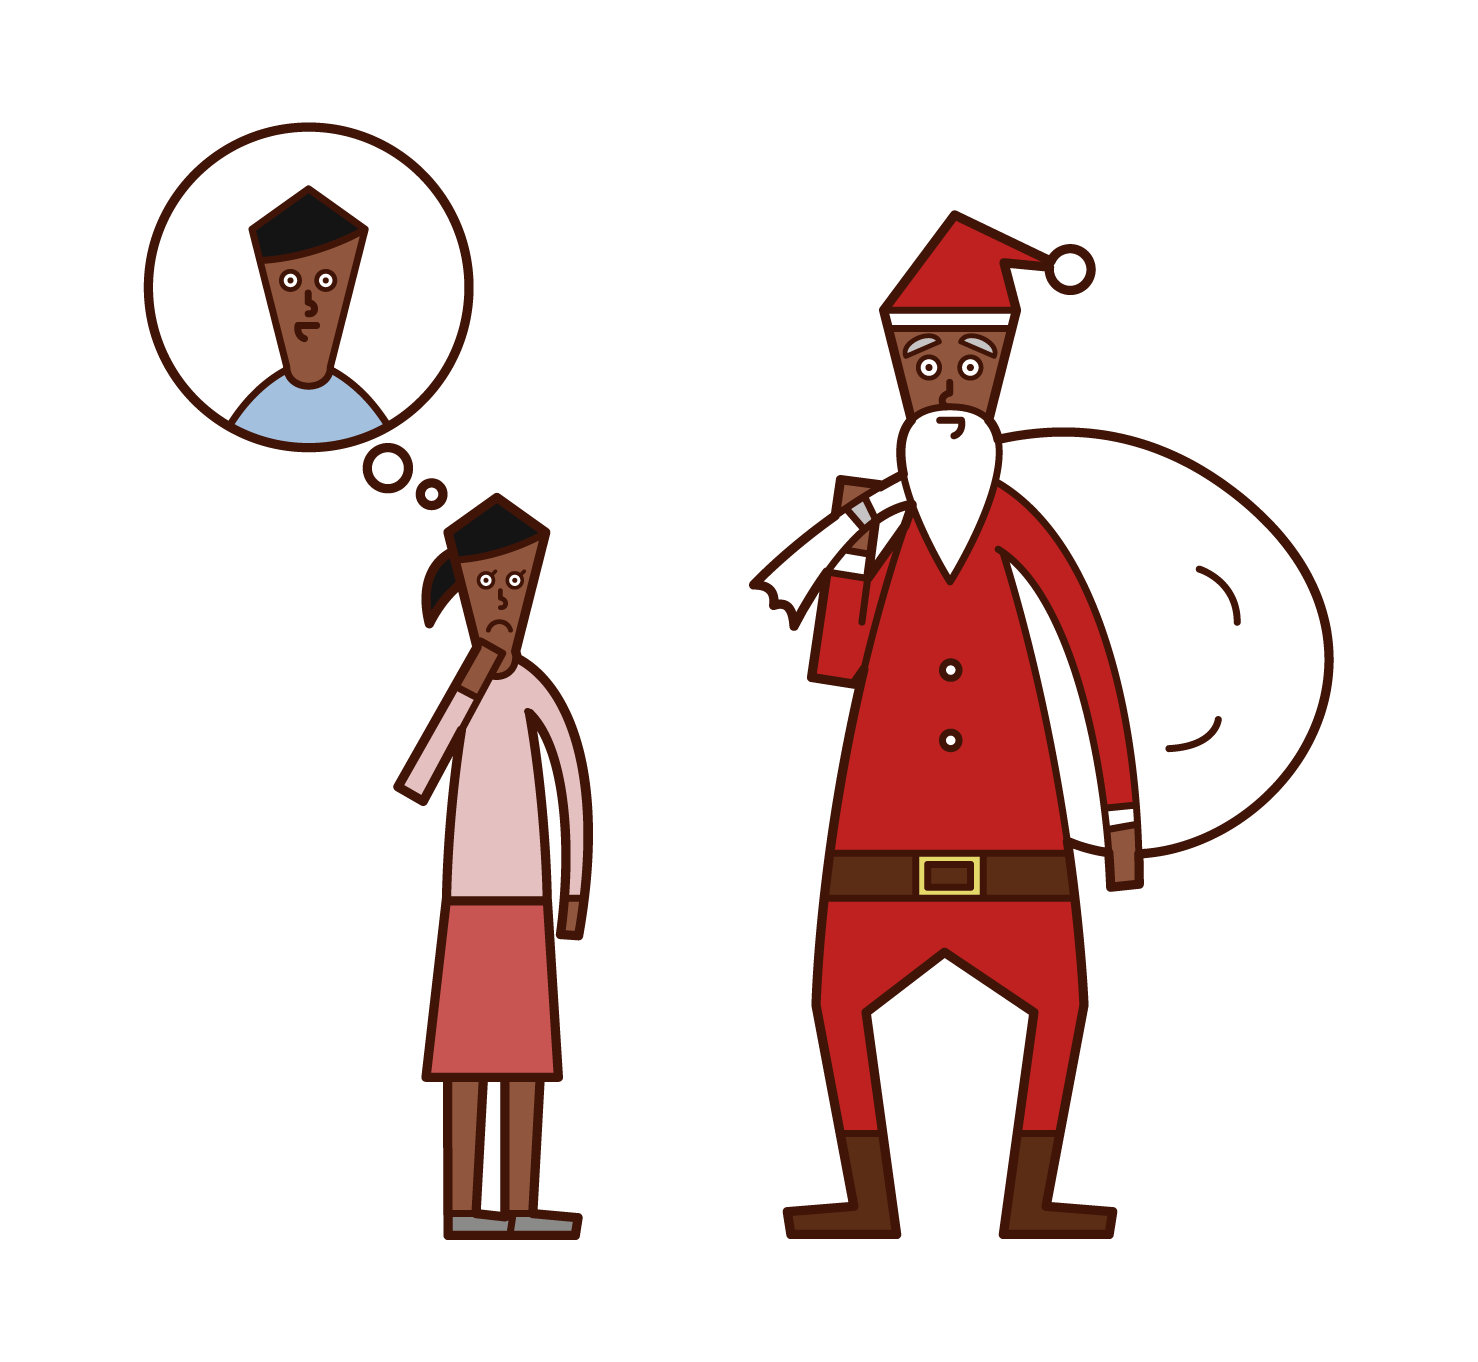 Illustration of a child (girl) who doubts the identity of Santa Claus